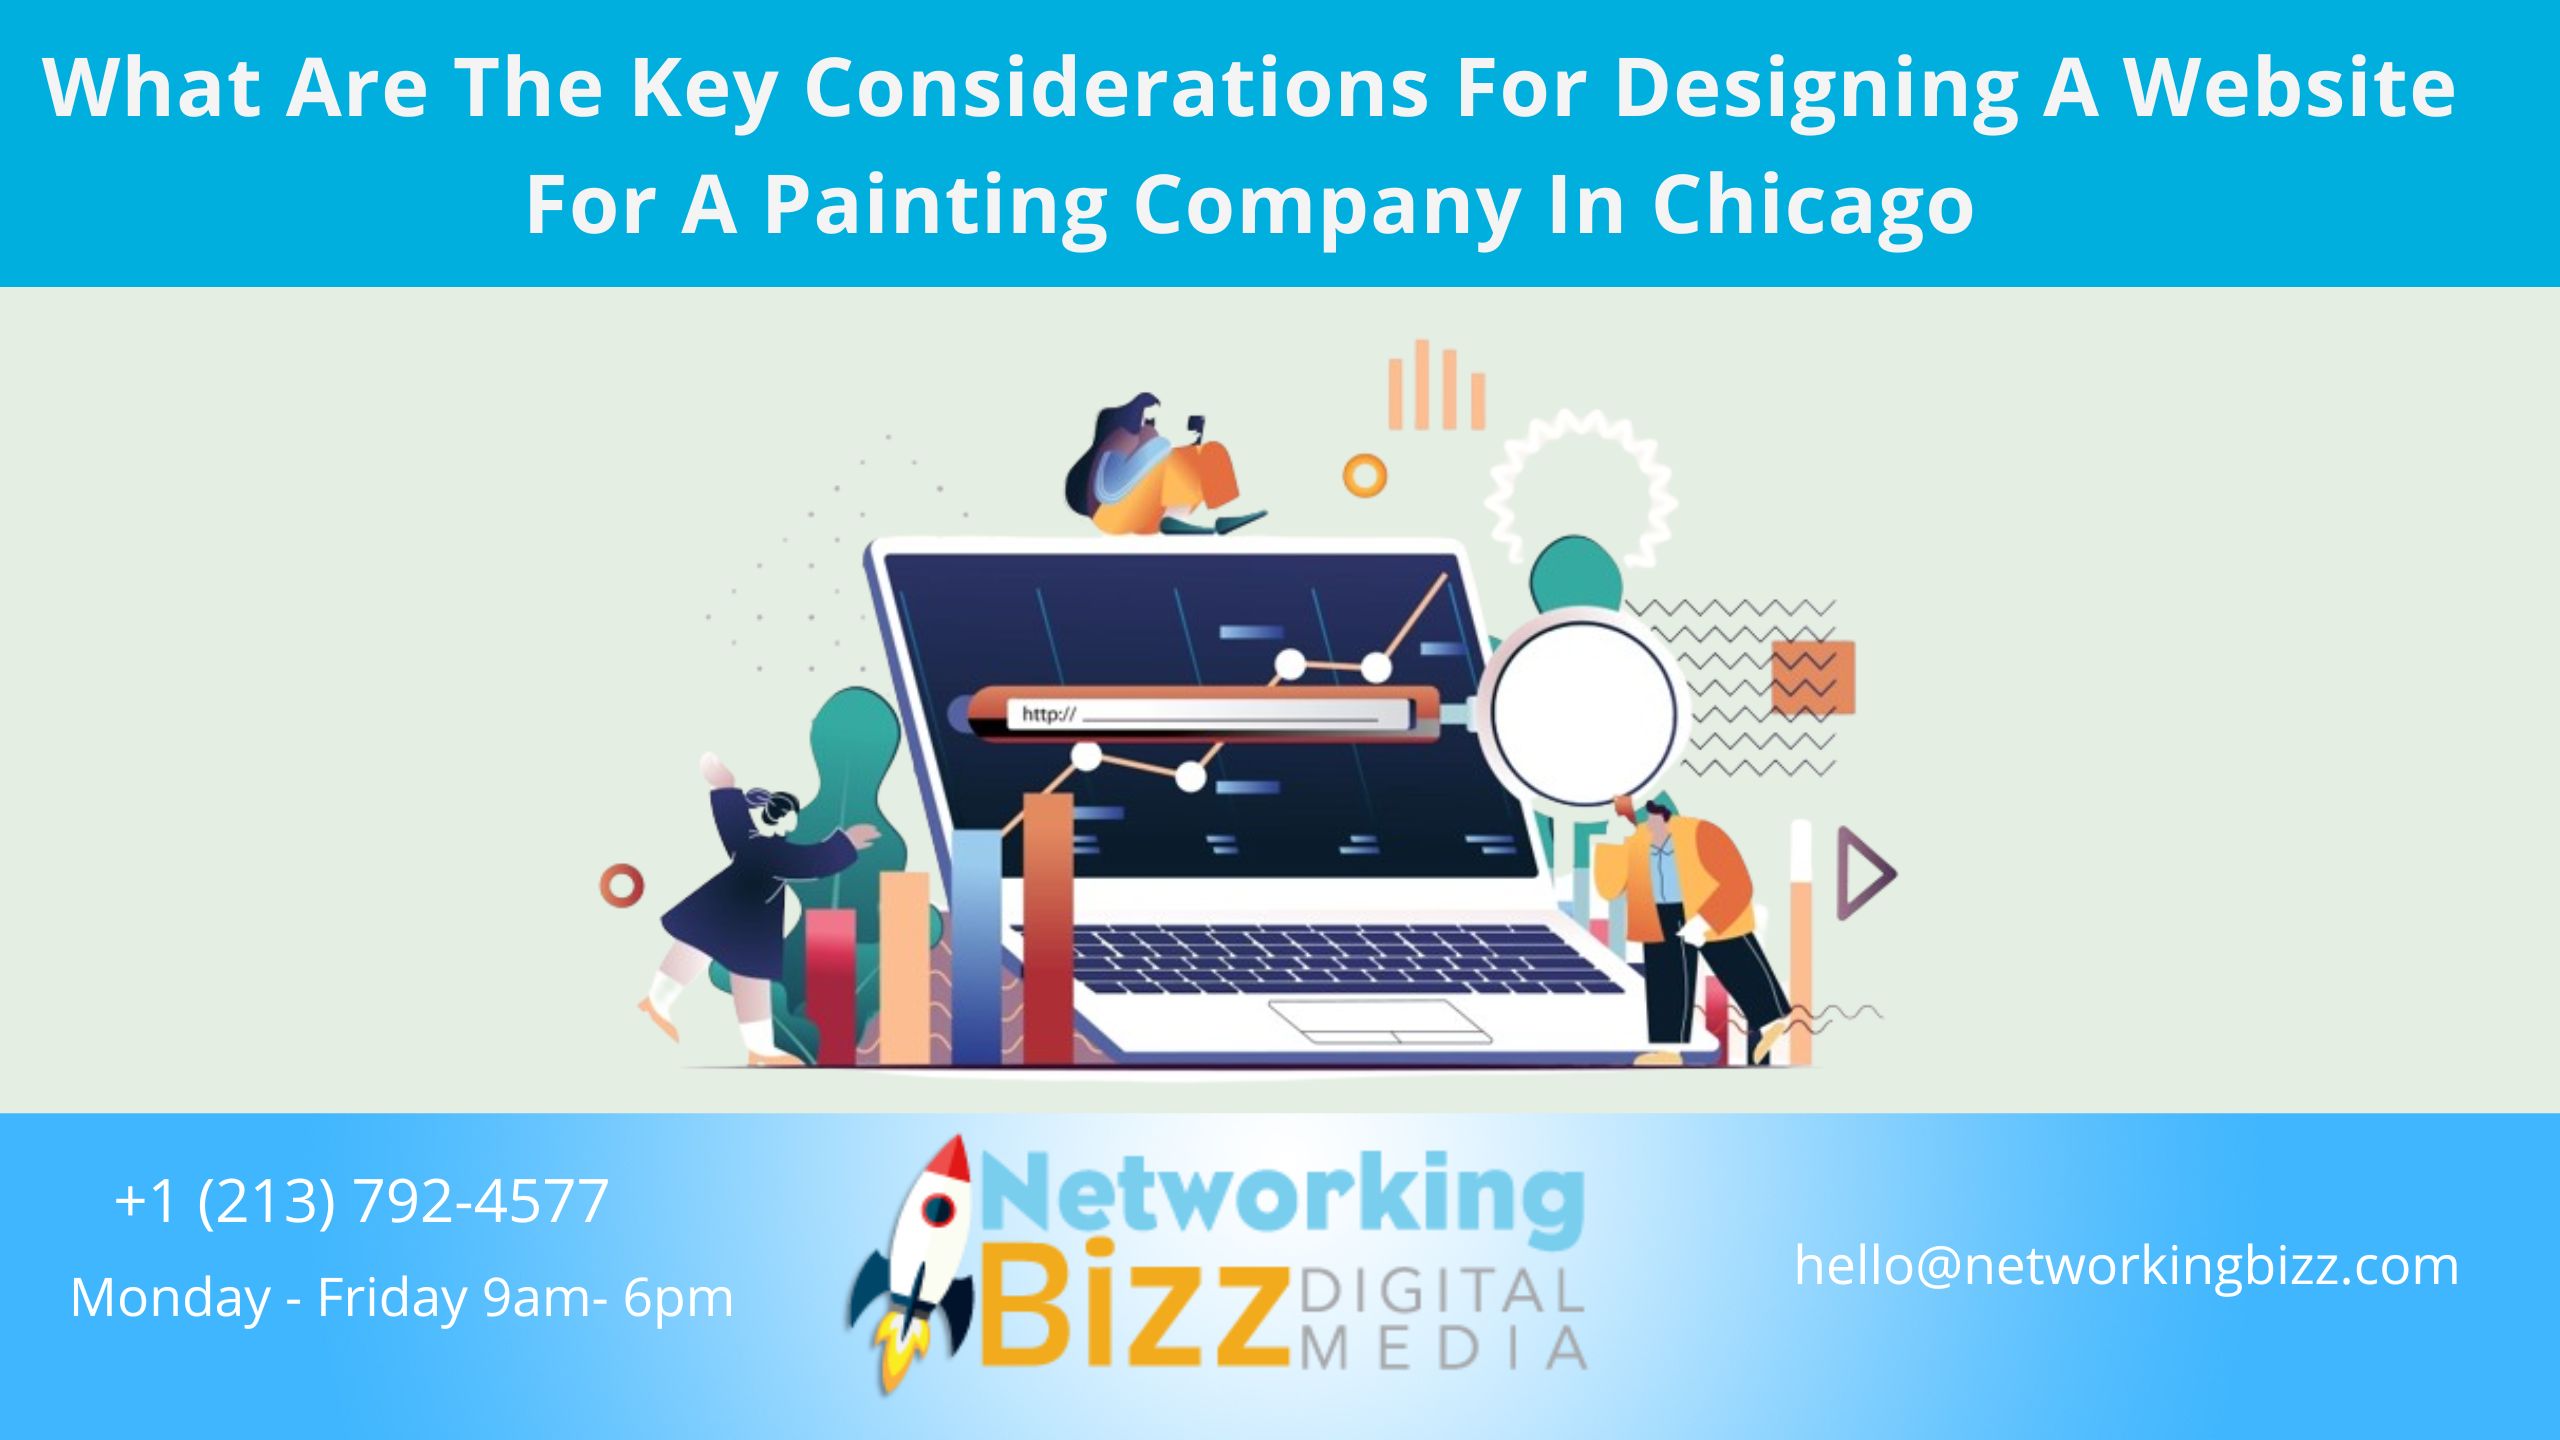 What Are The Key Considerations For Designing A Website For A Painting Company In Chicago